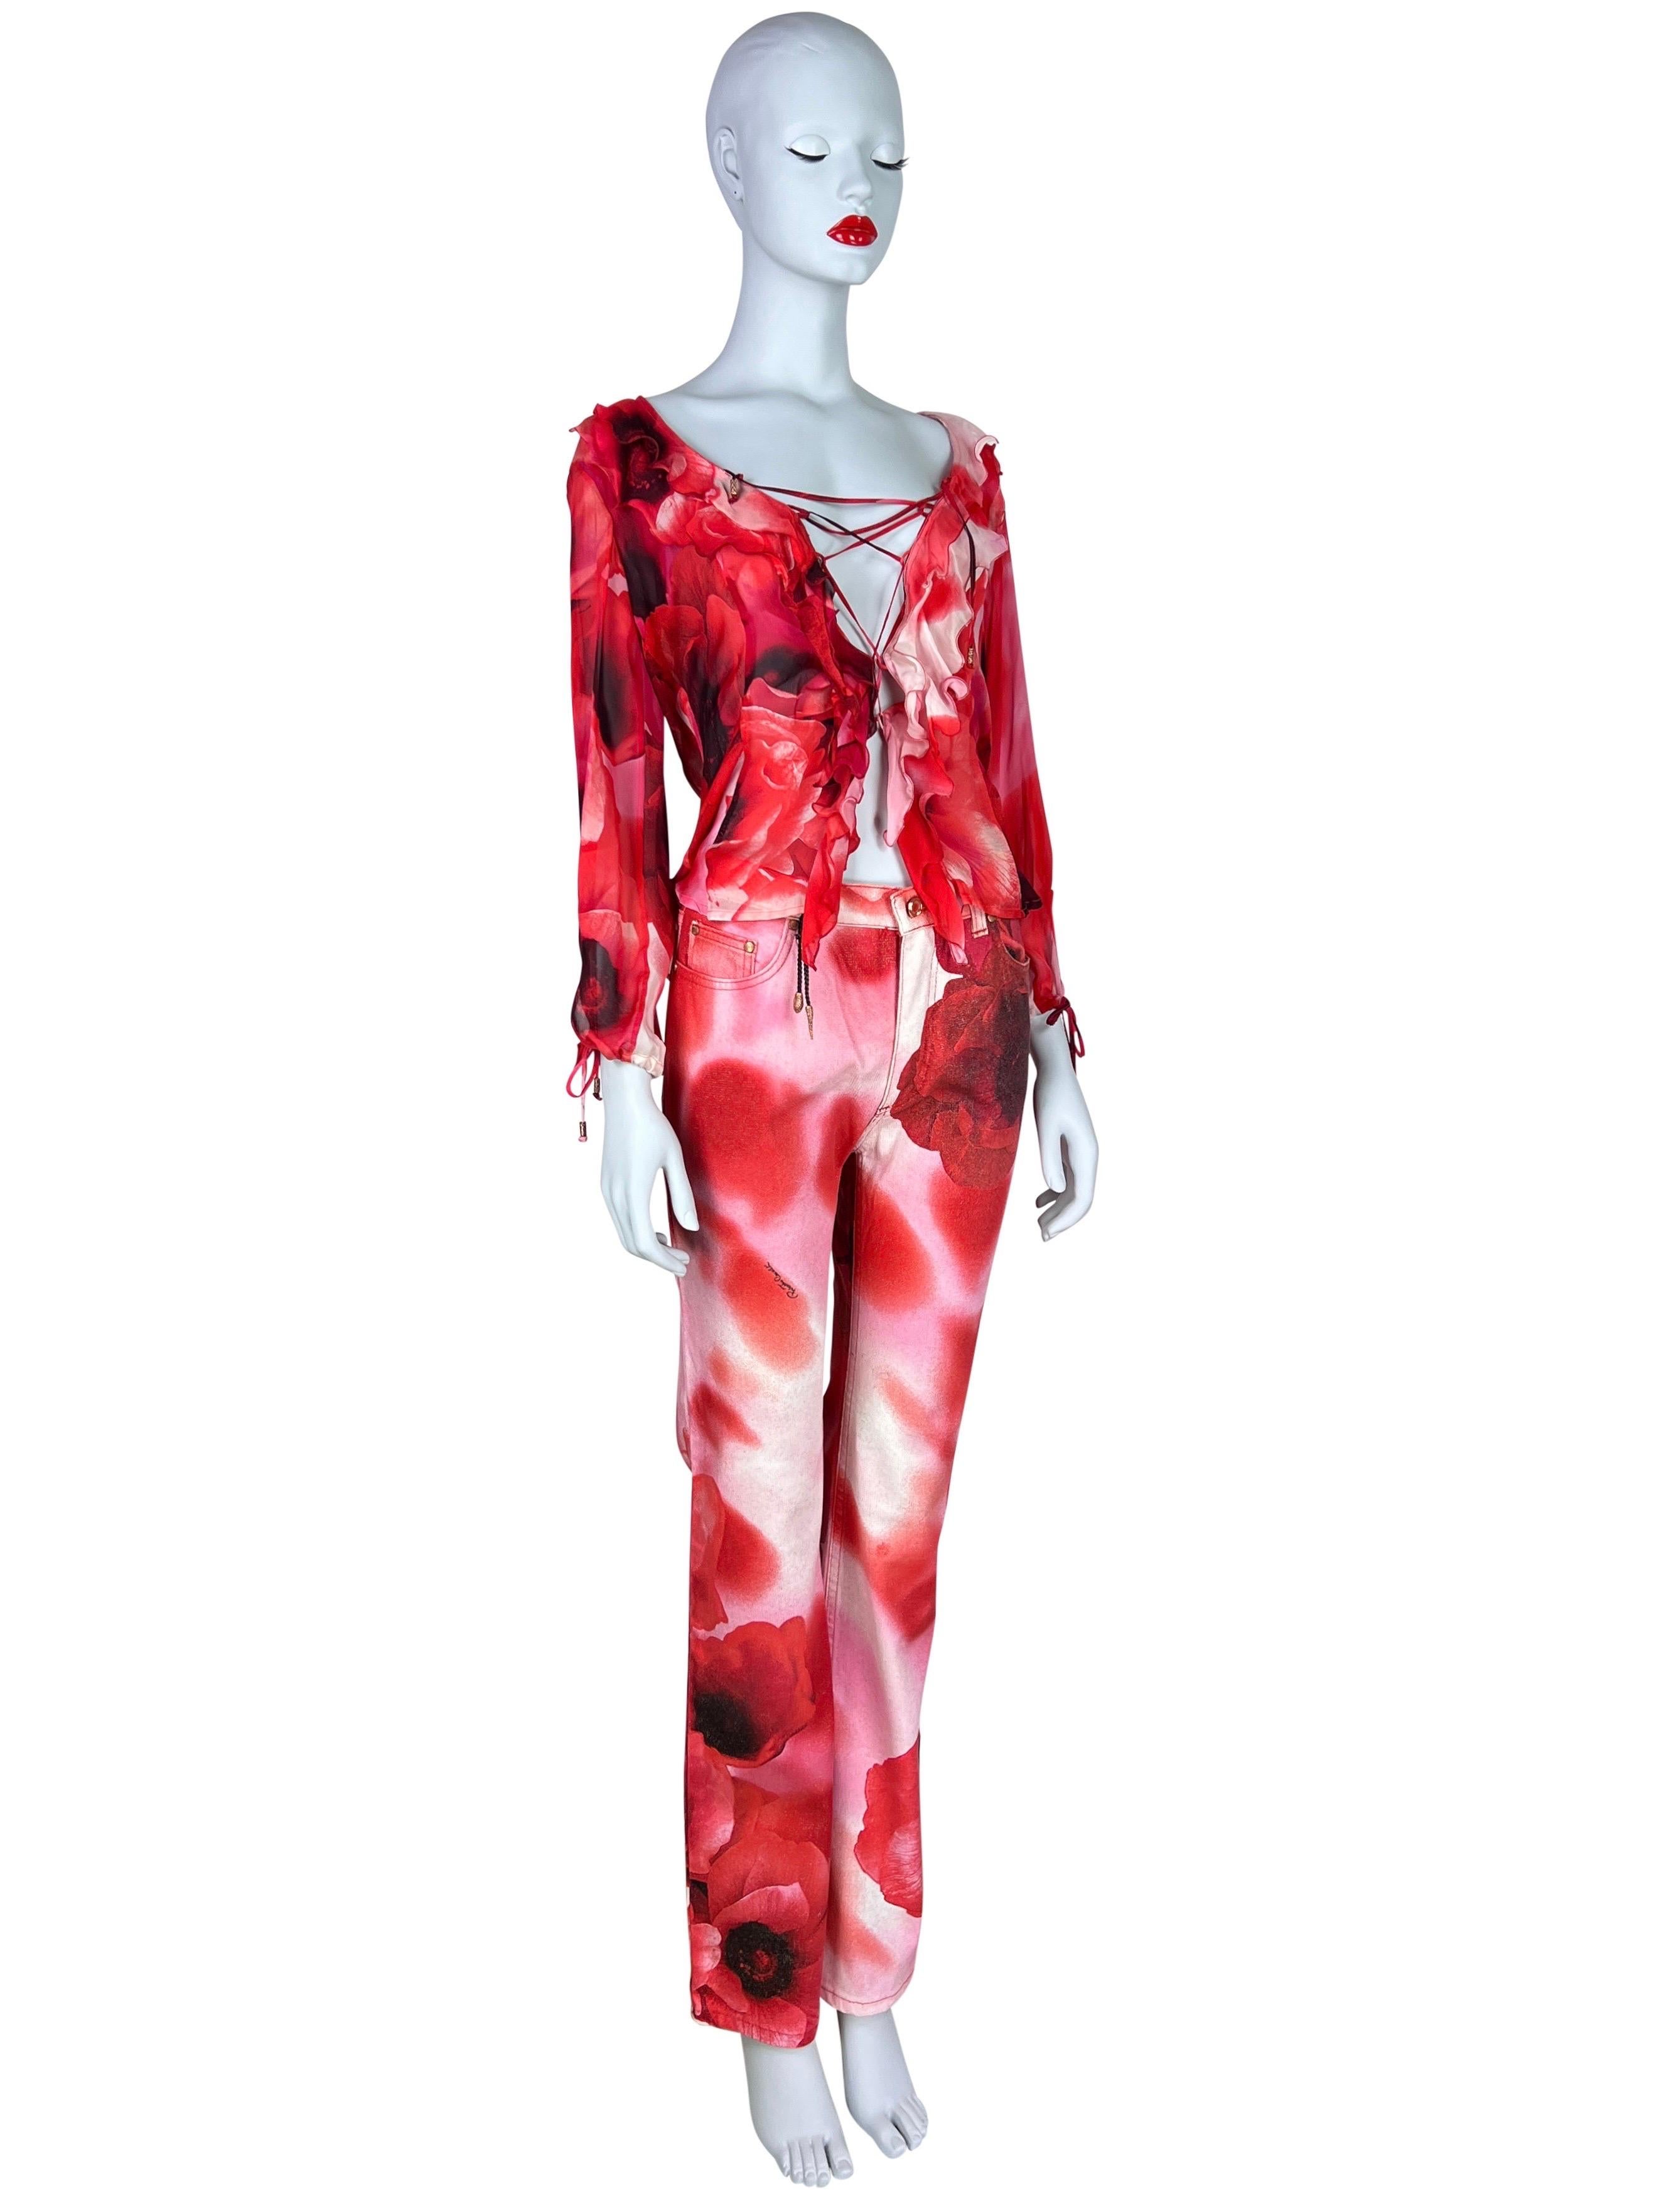 Roberto Cavalli Spring 2002 Poppy Print Blouse and Jeans Set For Sale 2